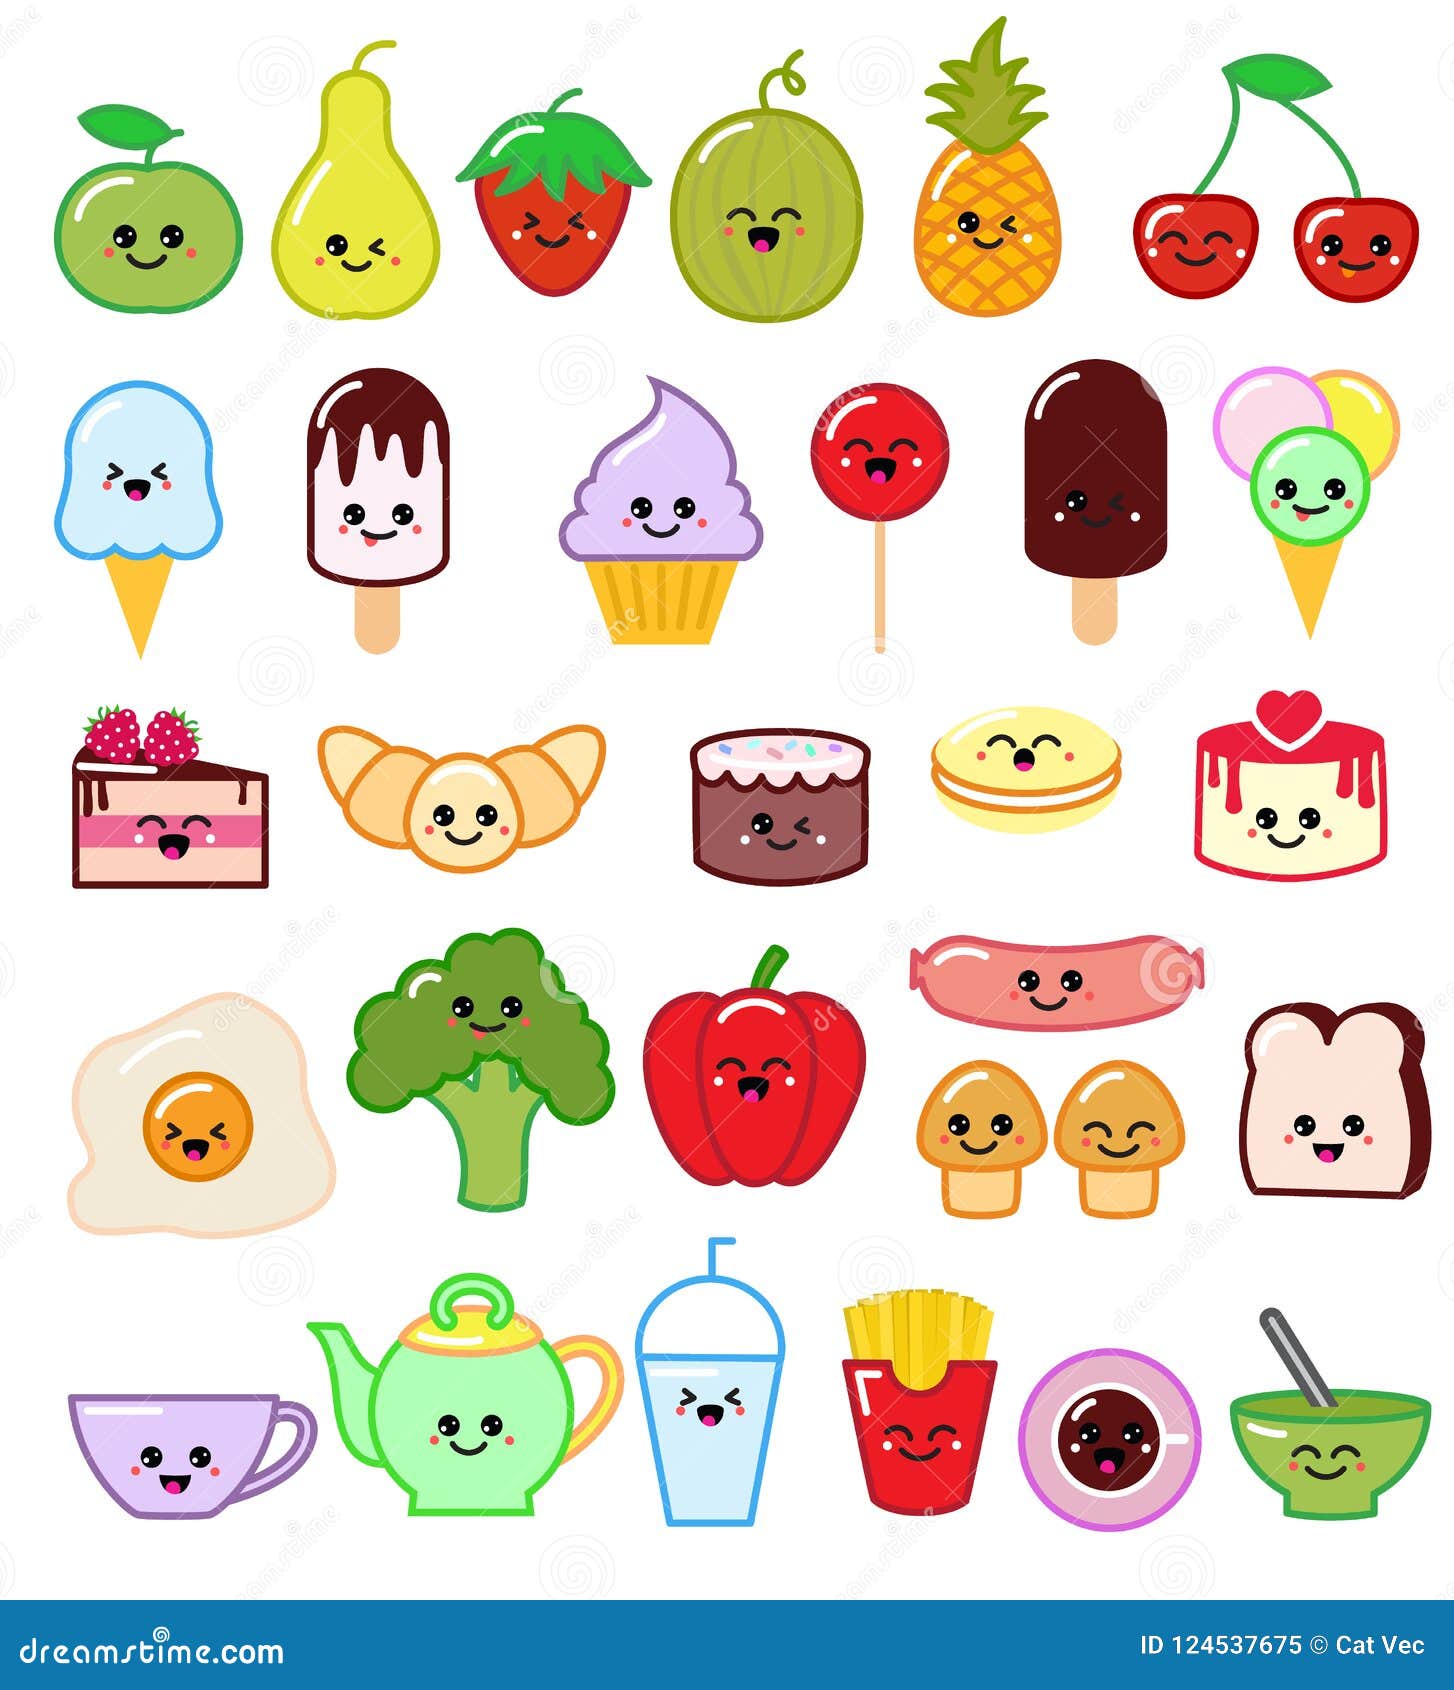 Kawaii Food Vector Emoticon Japanese Fruit Or Vegetable Character And Emoji Dish With Cartoon Sausage In Japan Stock Vector Illustration Of Character Fresh 124537675